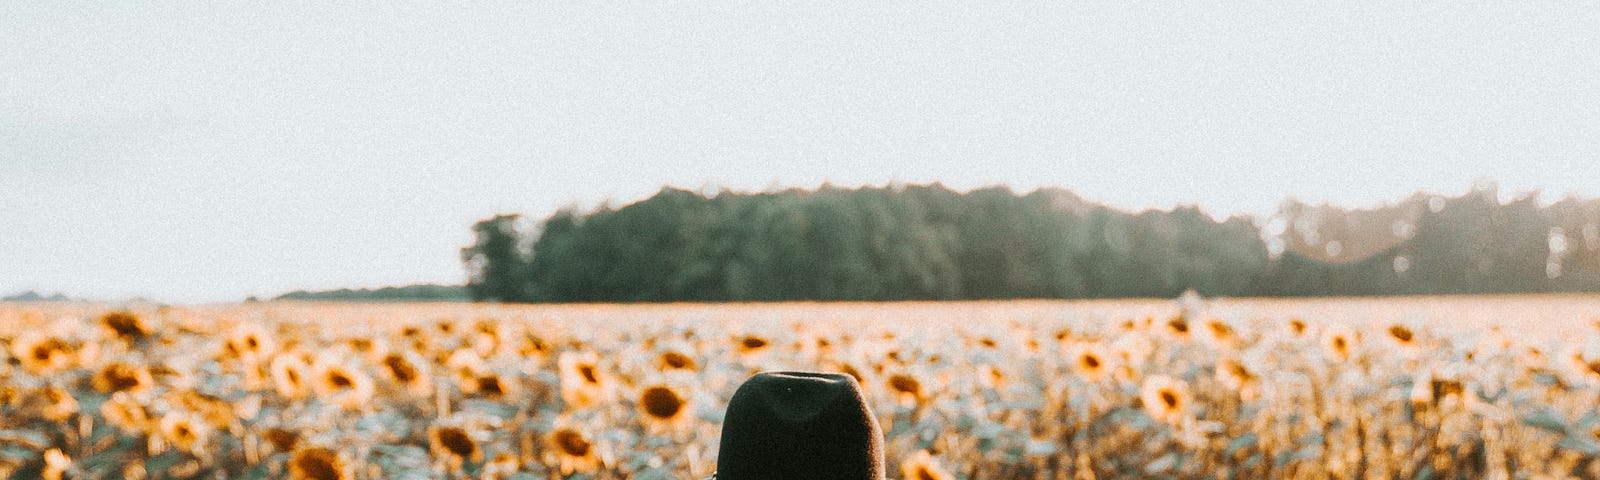 Seen from behind, a woman is looking at a field of sunflowers.